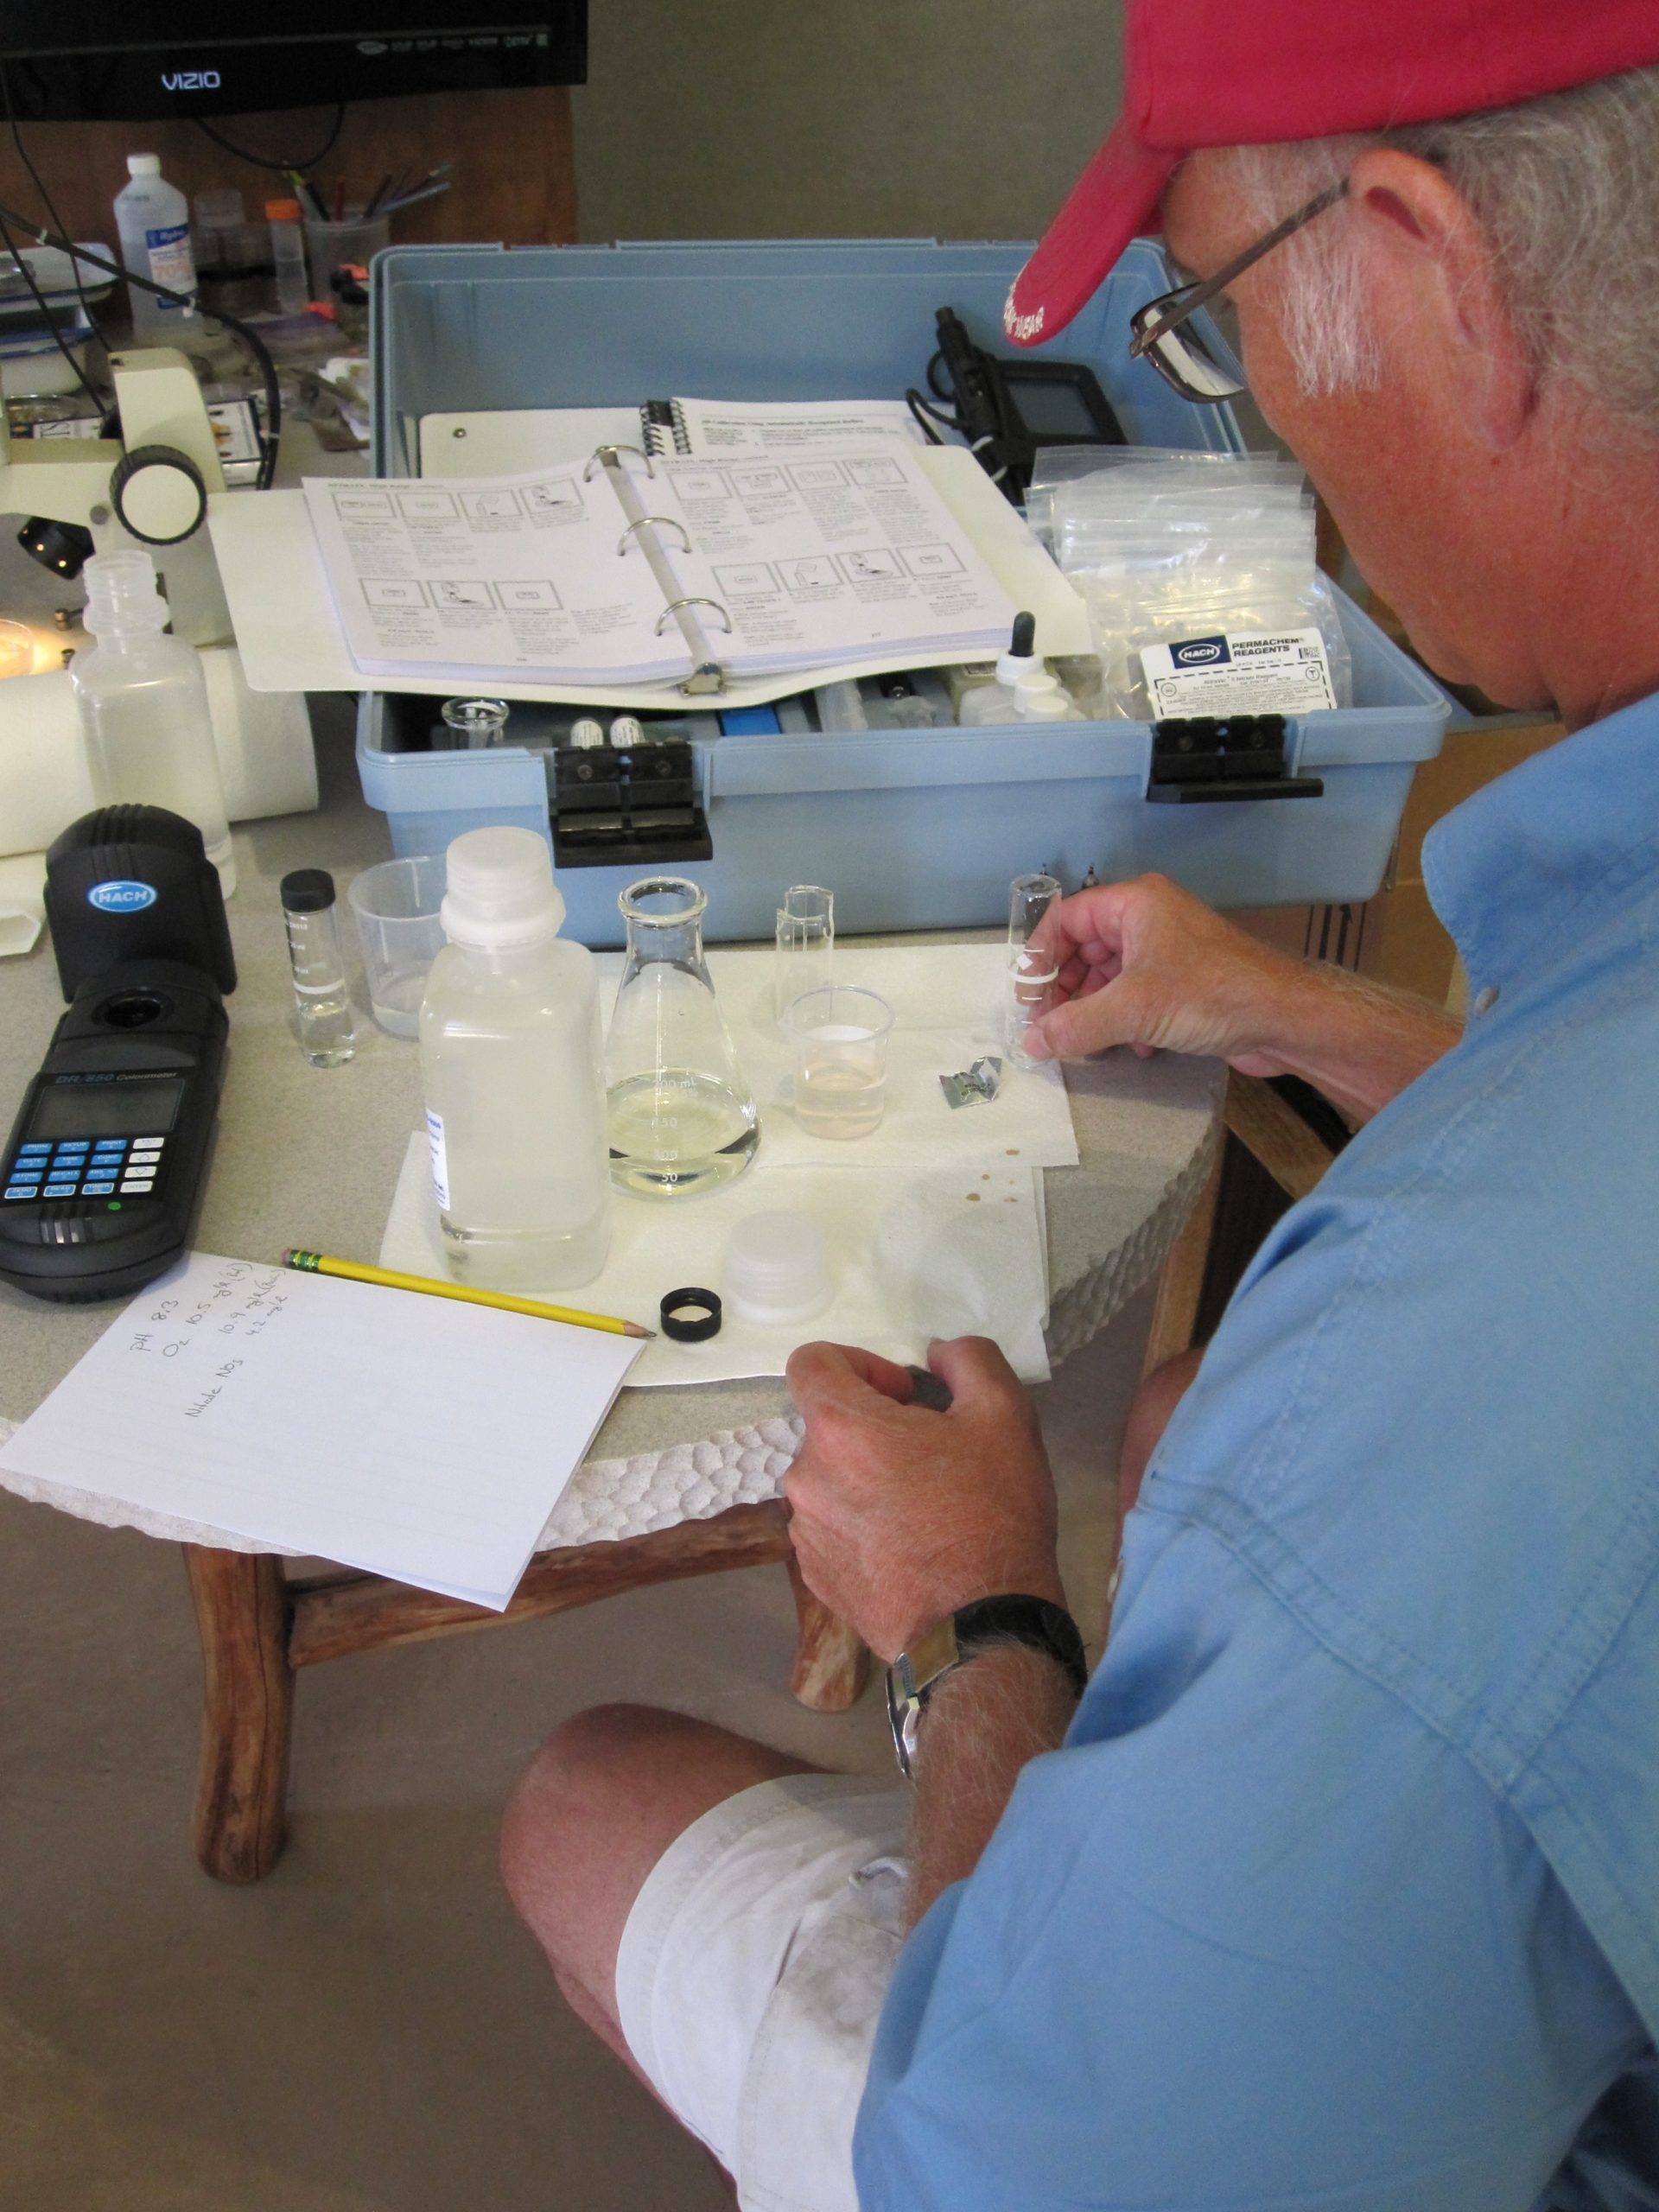 A man making notes at a table filled with water quality samples. Photo shot from over his shoulder.